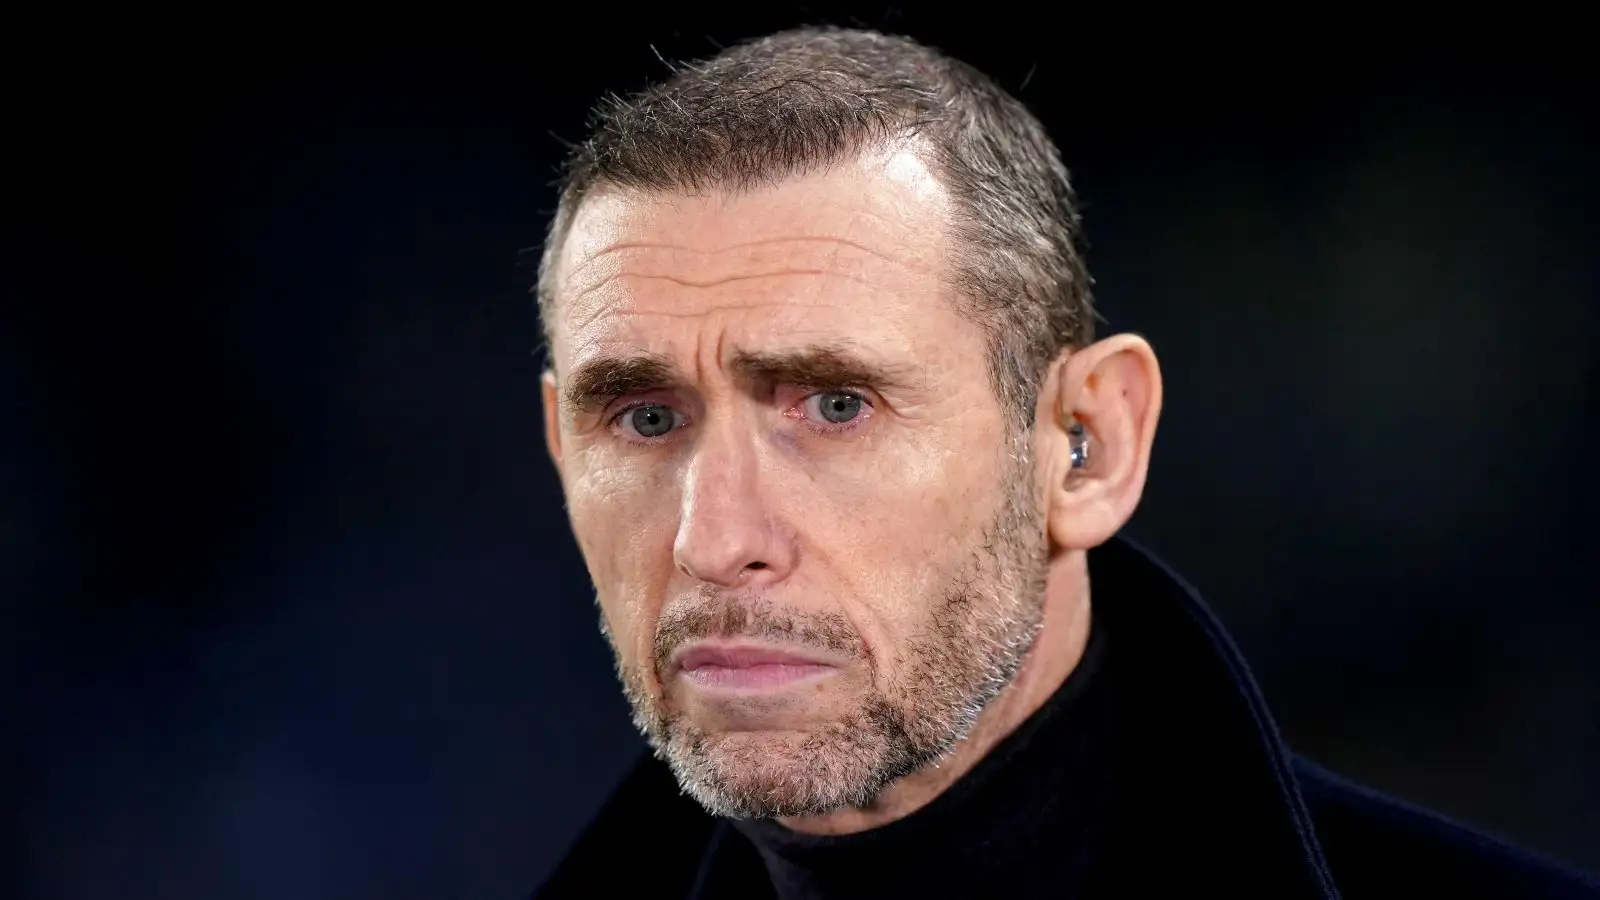 Arsenal legend Keown reveals ‘firm favourites’ for title after Gunners, Man City both win